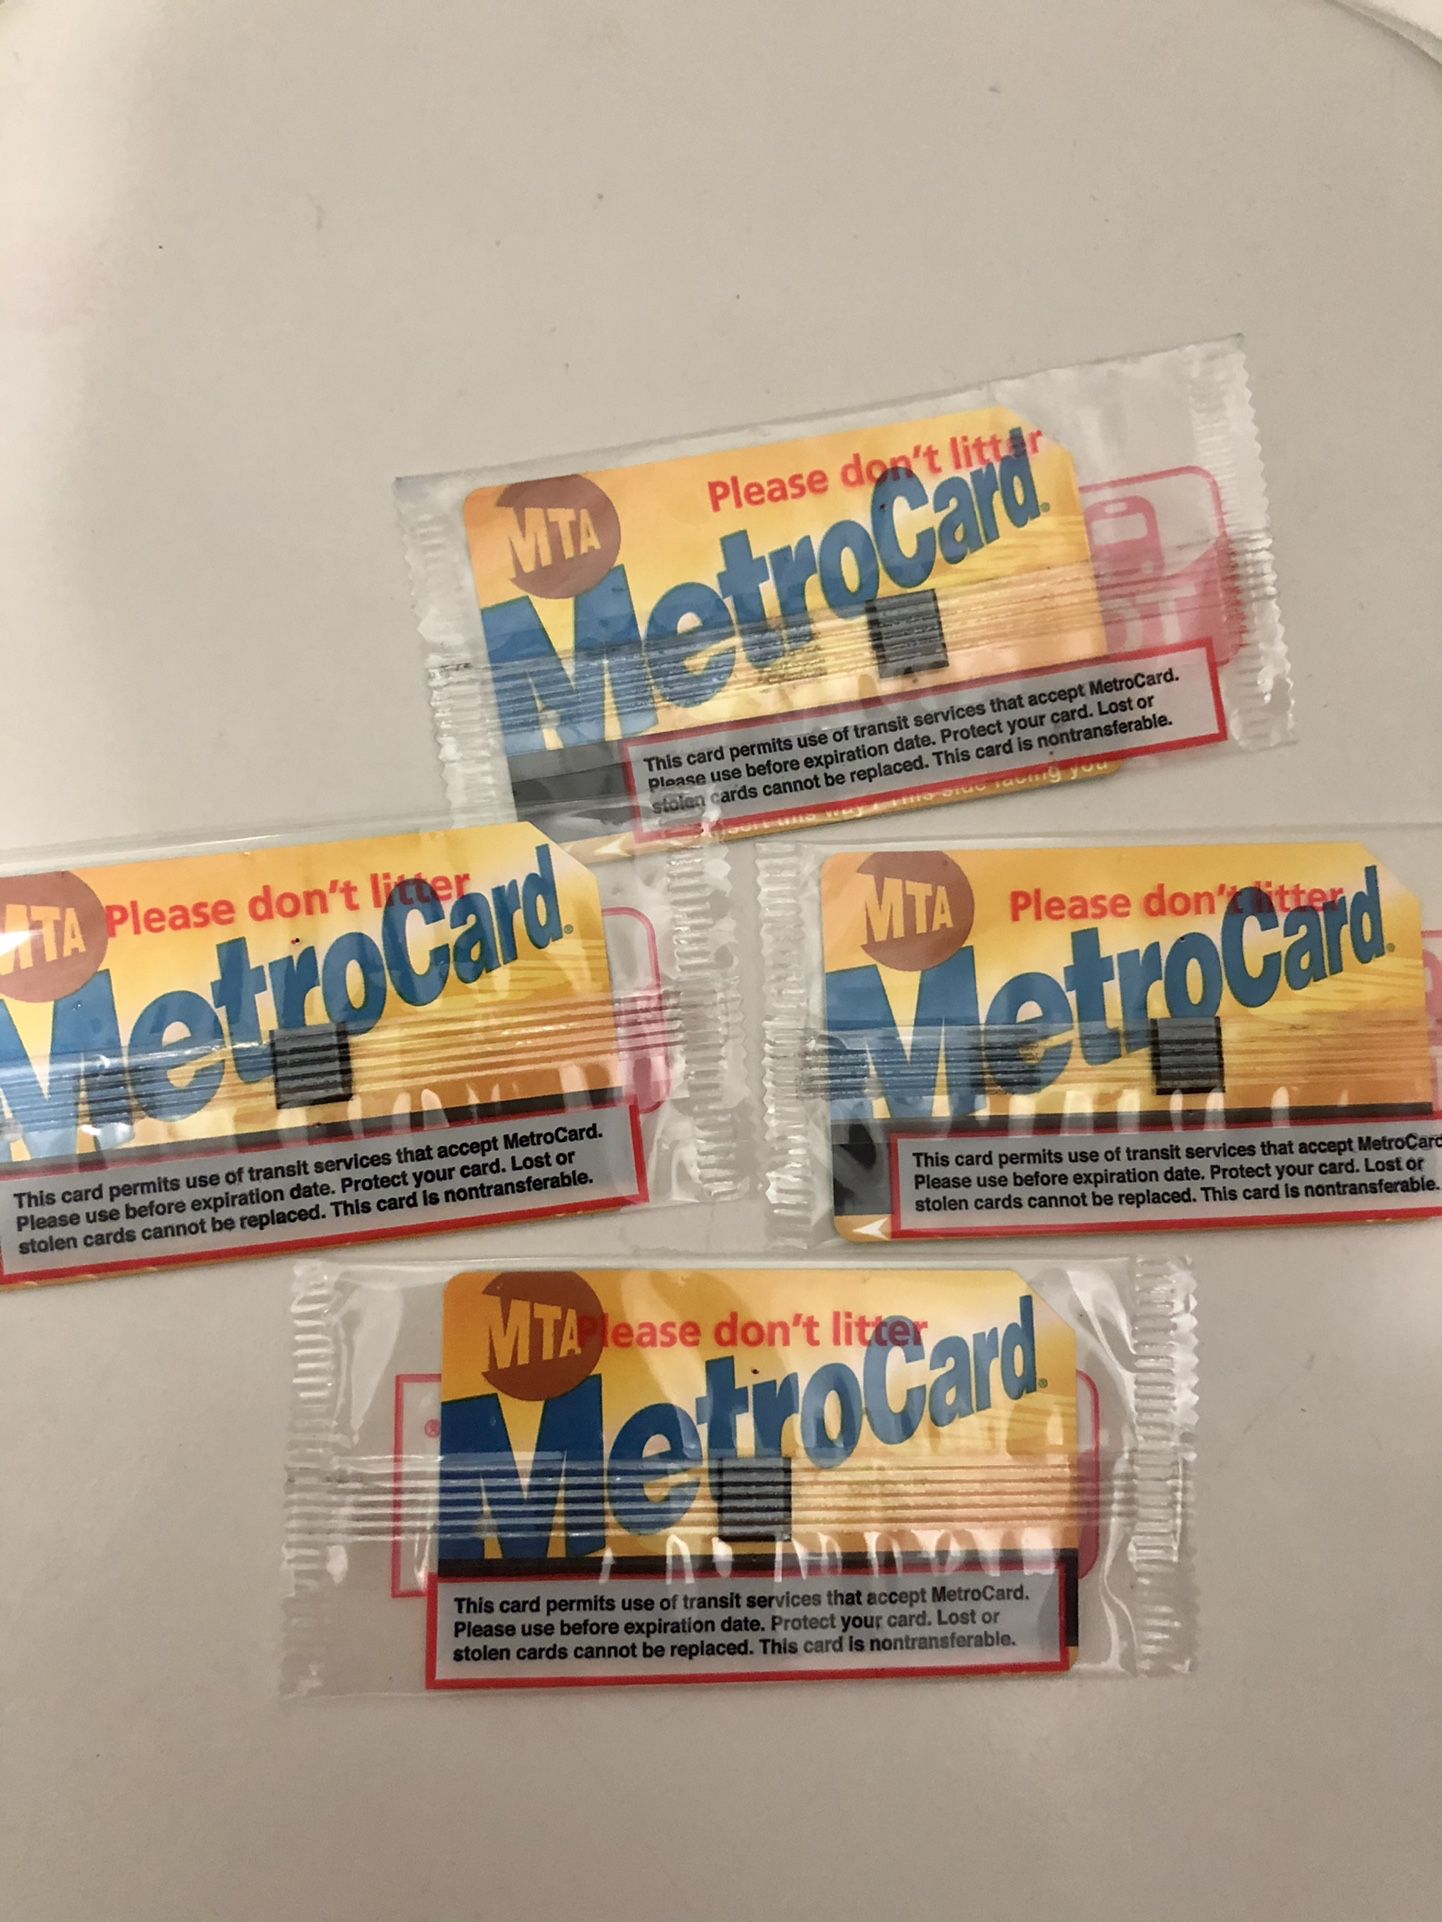 30 Day Unlimited MetroCard